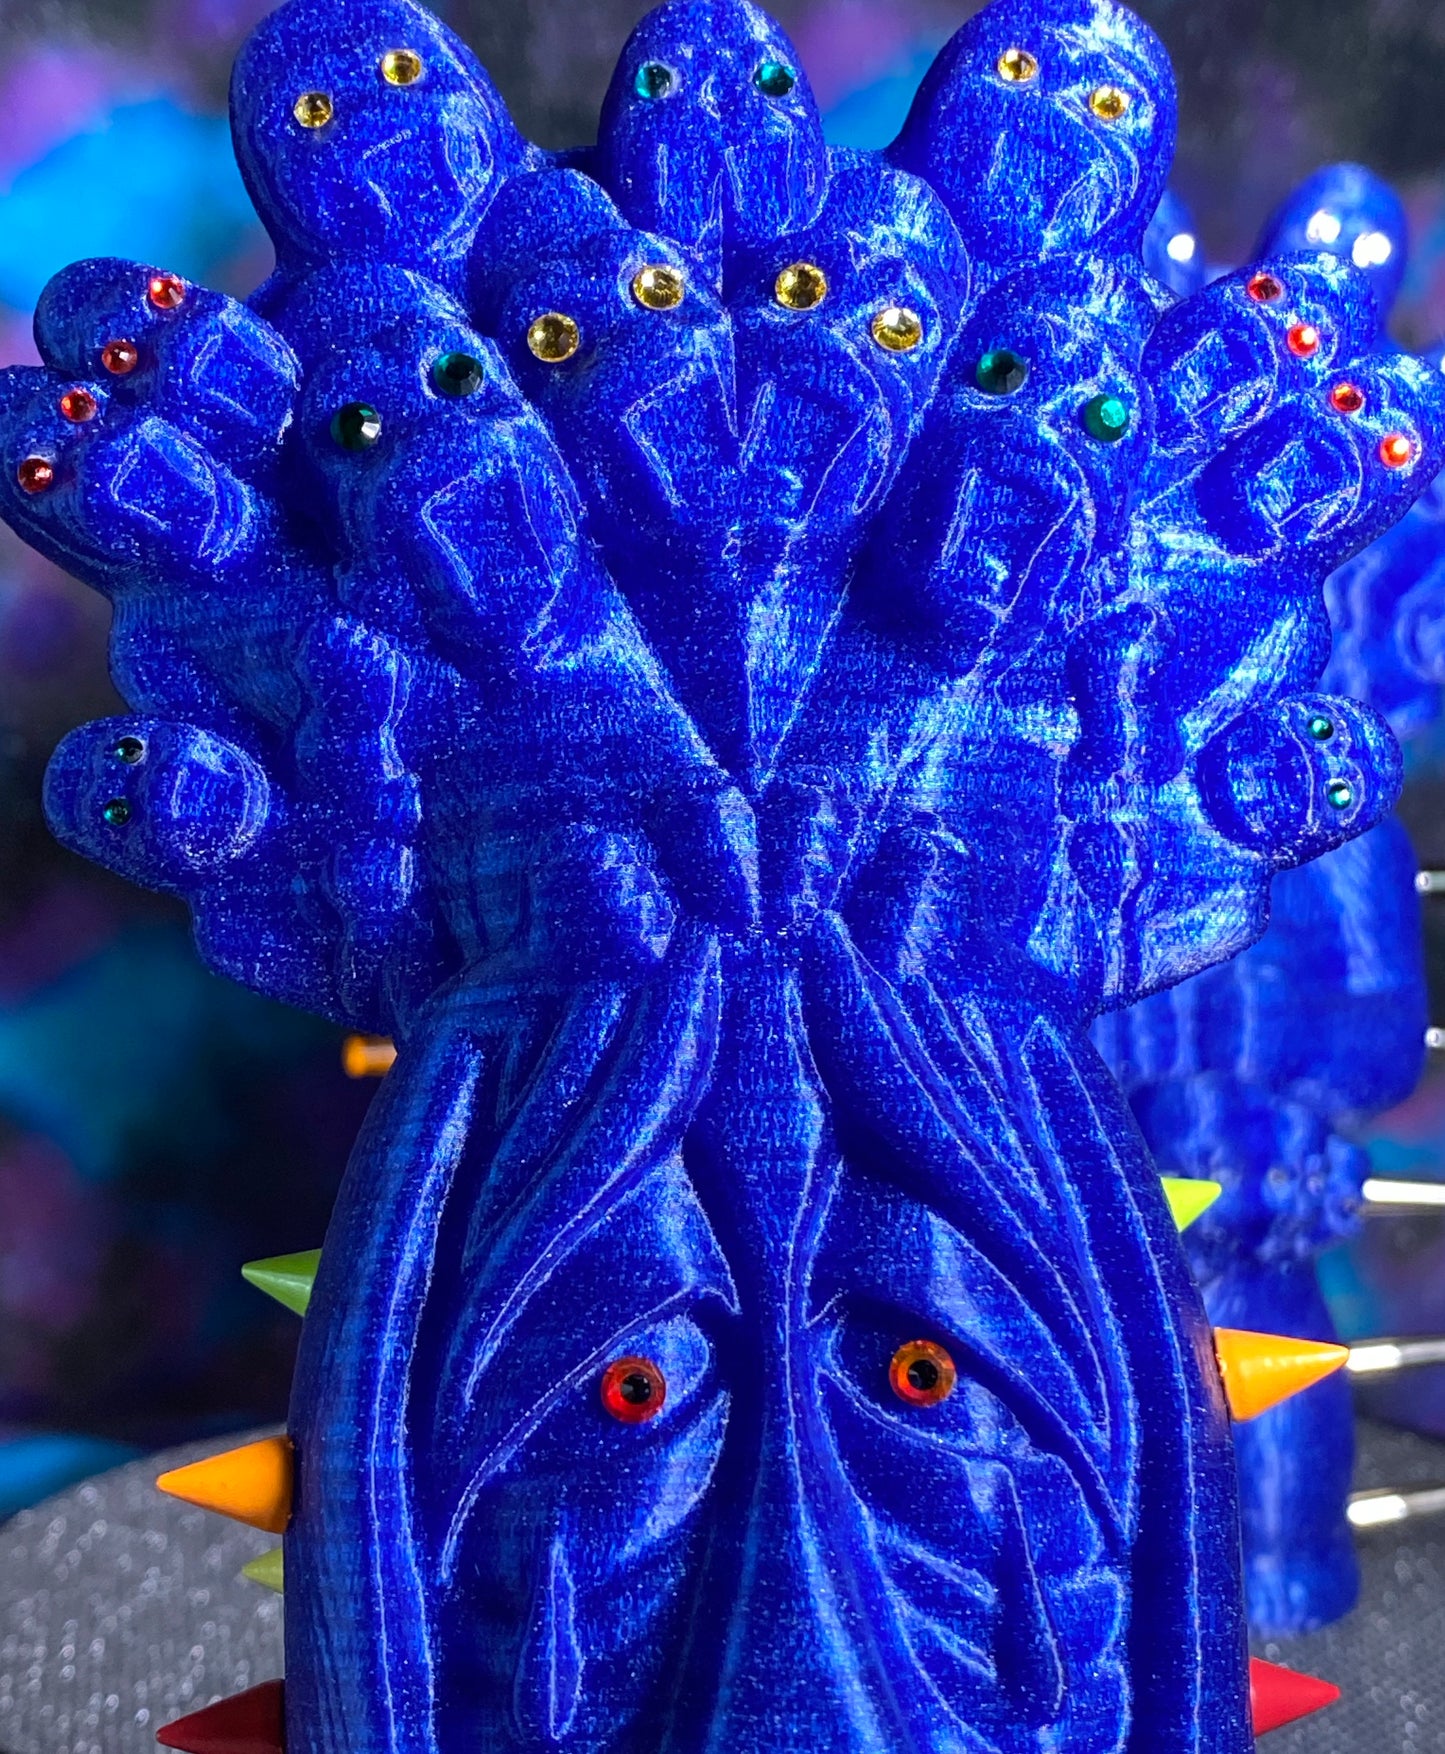 His Majesty, The King: Blue Glitter with Multicolor Rhinestones and Spikes